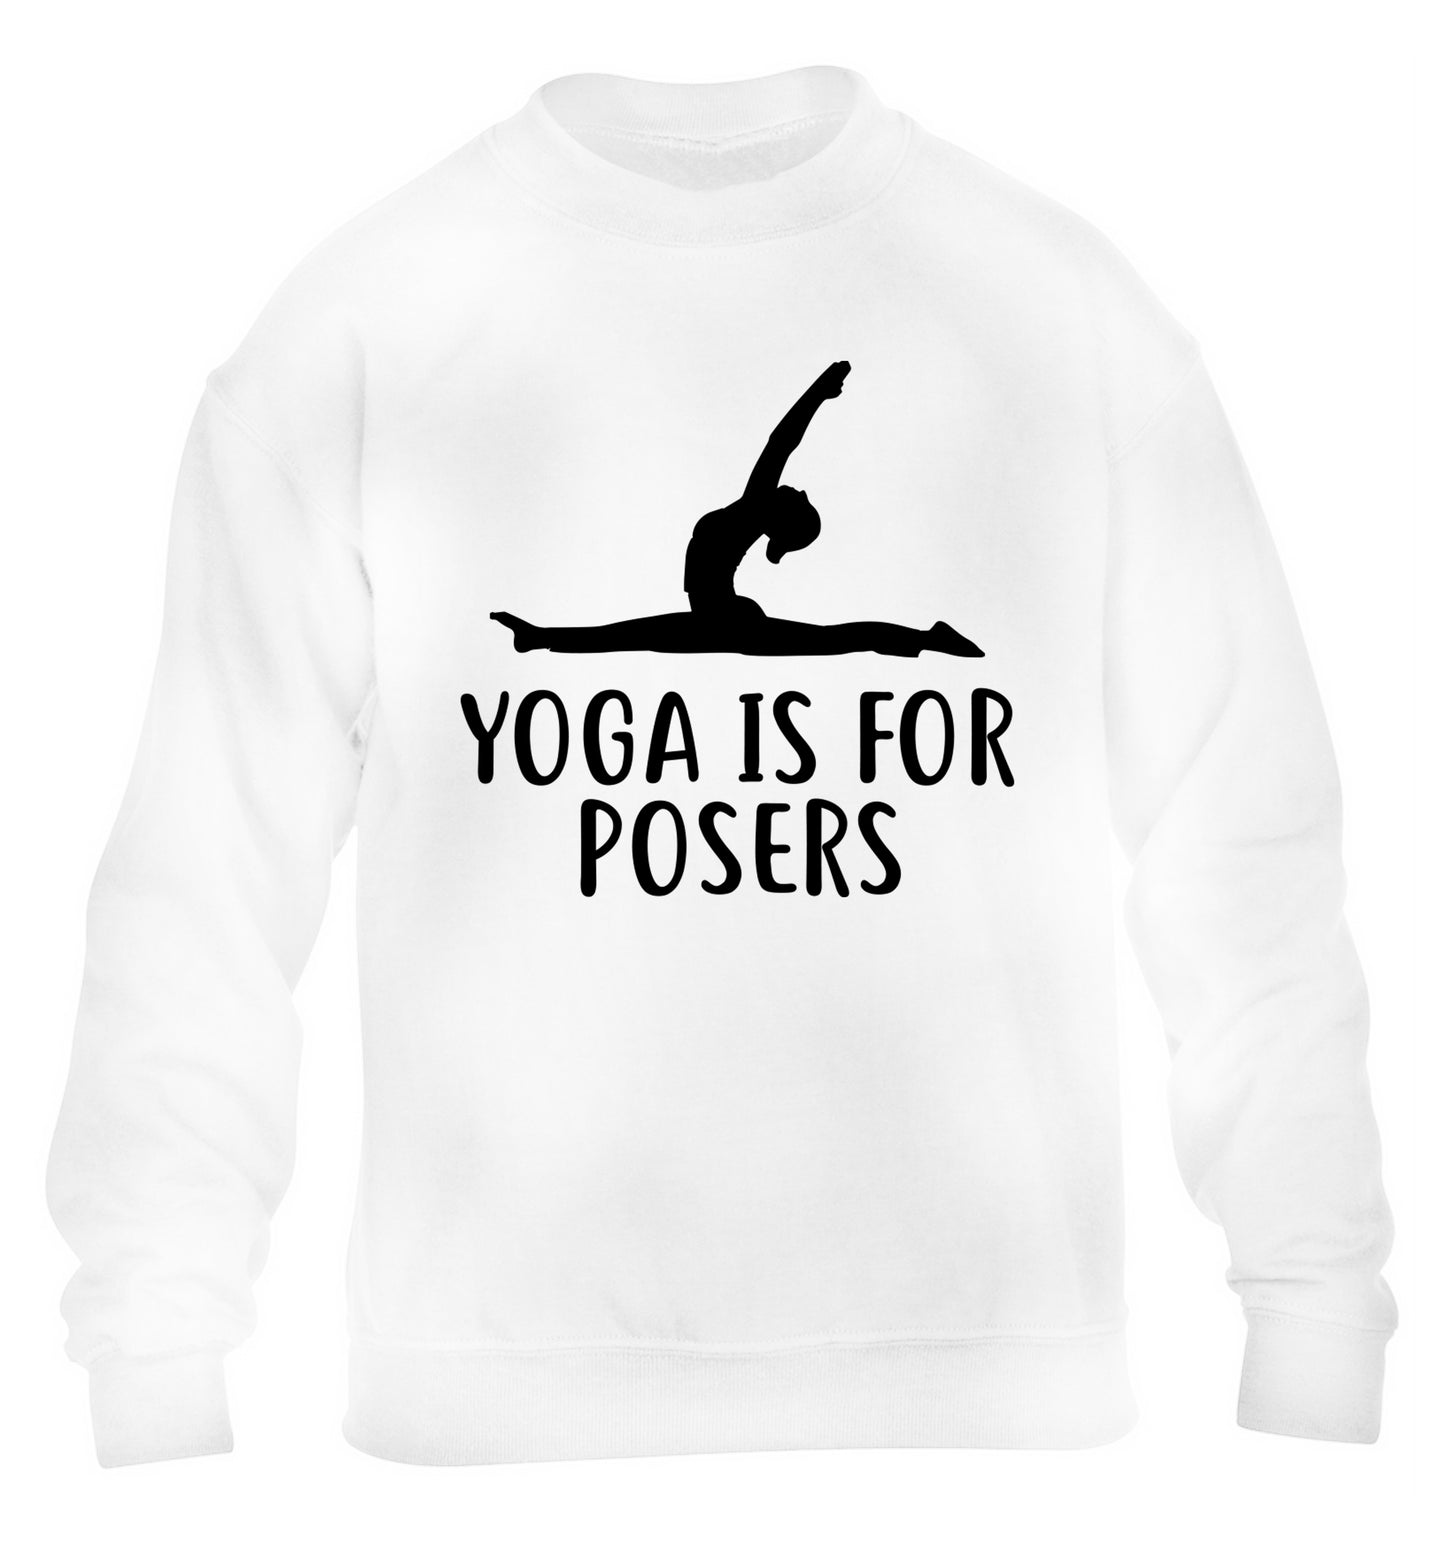 Yoga is for posers children's white sweater 12-13 Years